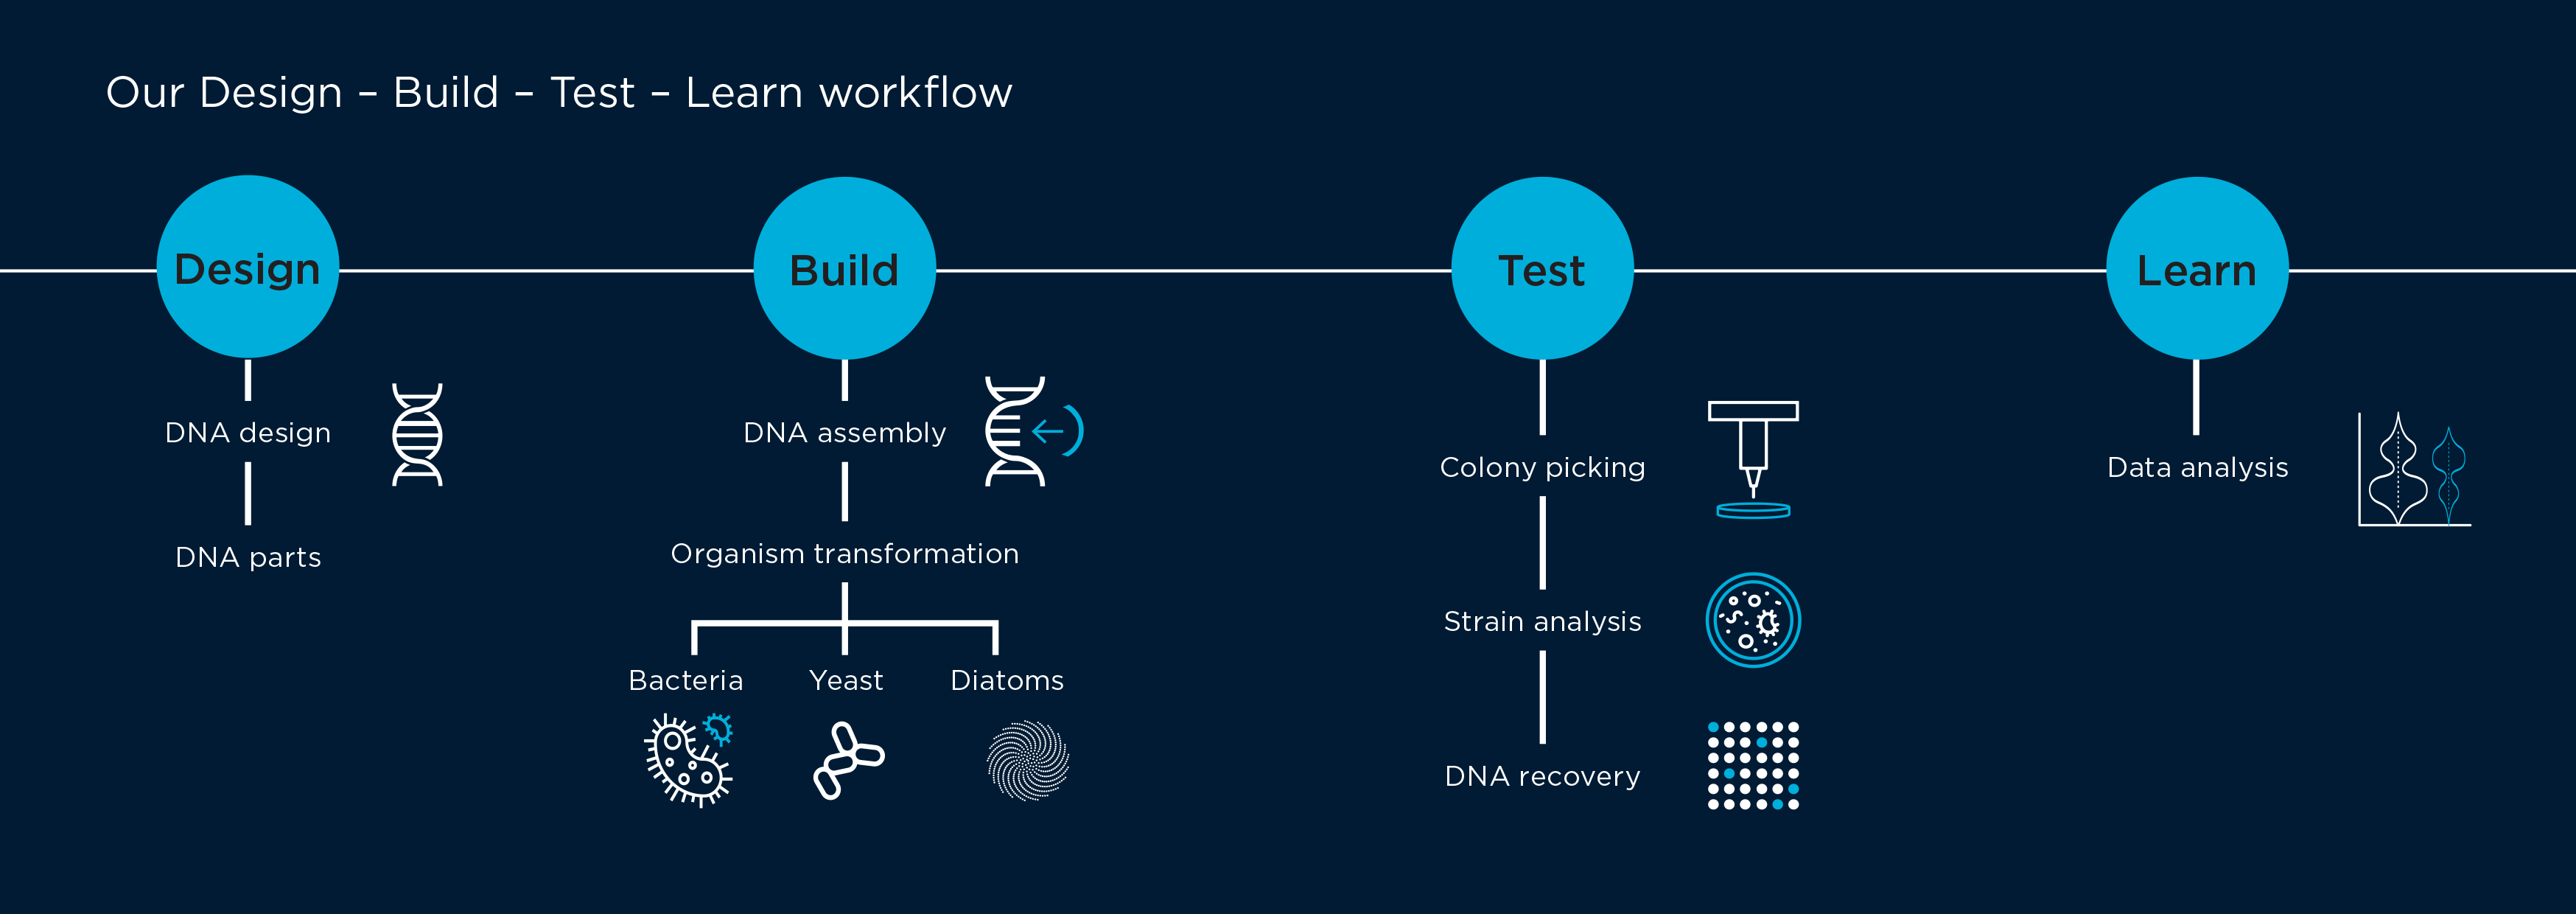 An infographic that describes the 'design, build, test, learn' cycle of the CSIRO BioFoundry